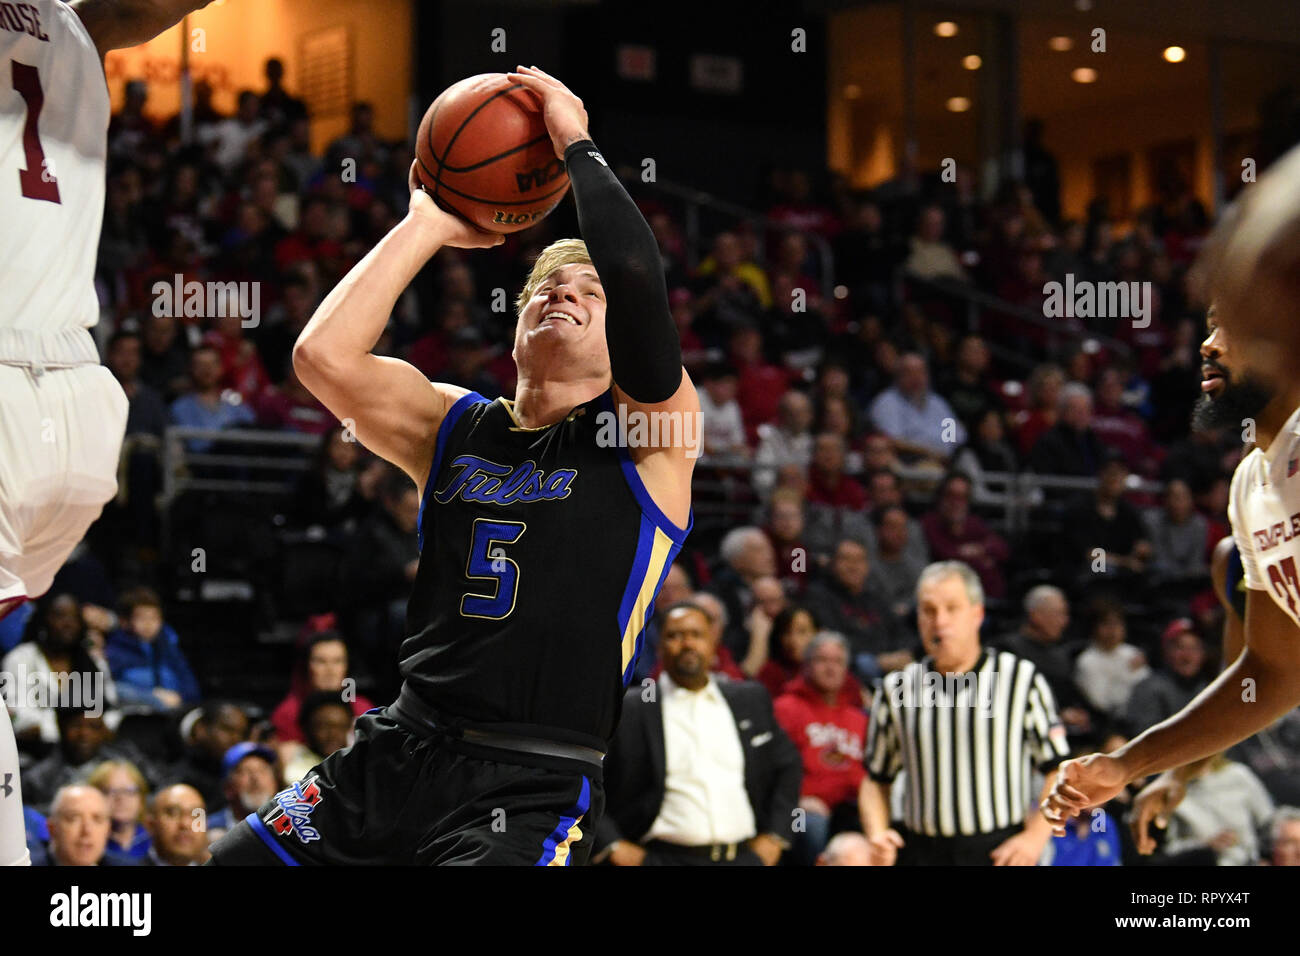 Philadelphia, Pennsylvania, USA. 23rd Feb, 2019. Tulsa Golden Hurricane guard LAWSON KORITA (5) drives to the basket during the American Athletic Conference basketball game played at the Liacouras Center in Philadelphia. Temple beat Tulsa 84-73. Credit: Ken Inness/ZUMA Wire/Alamy Live News Stock Photo